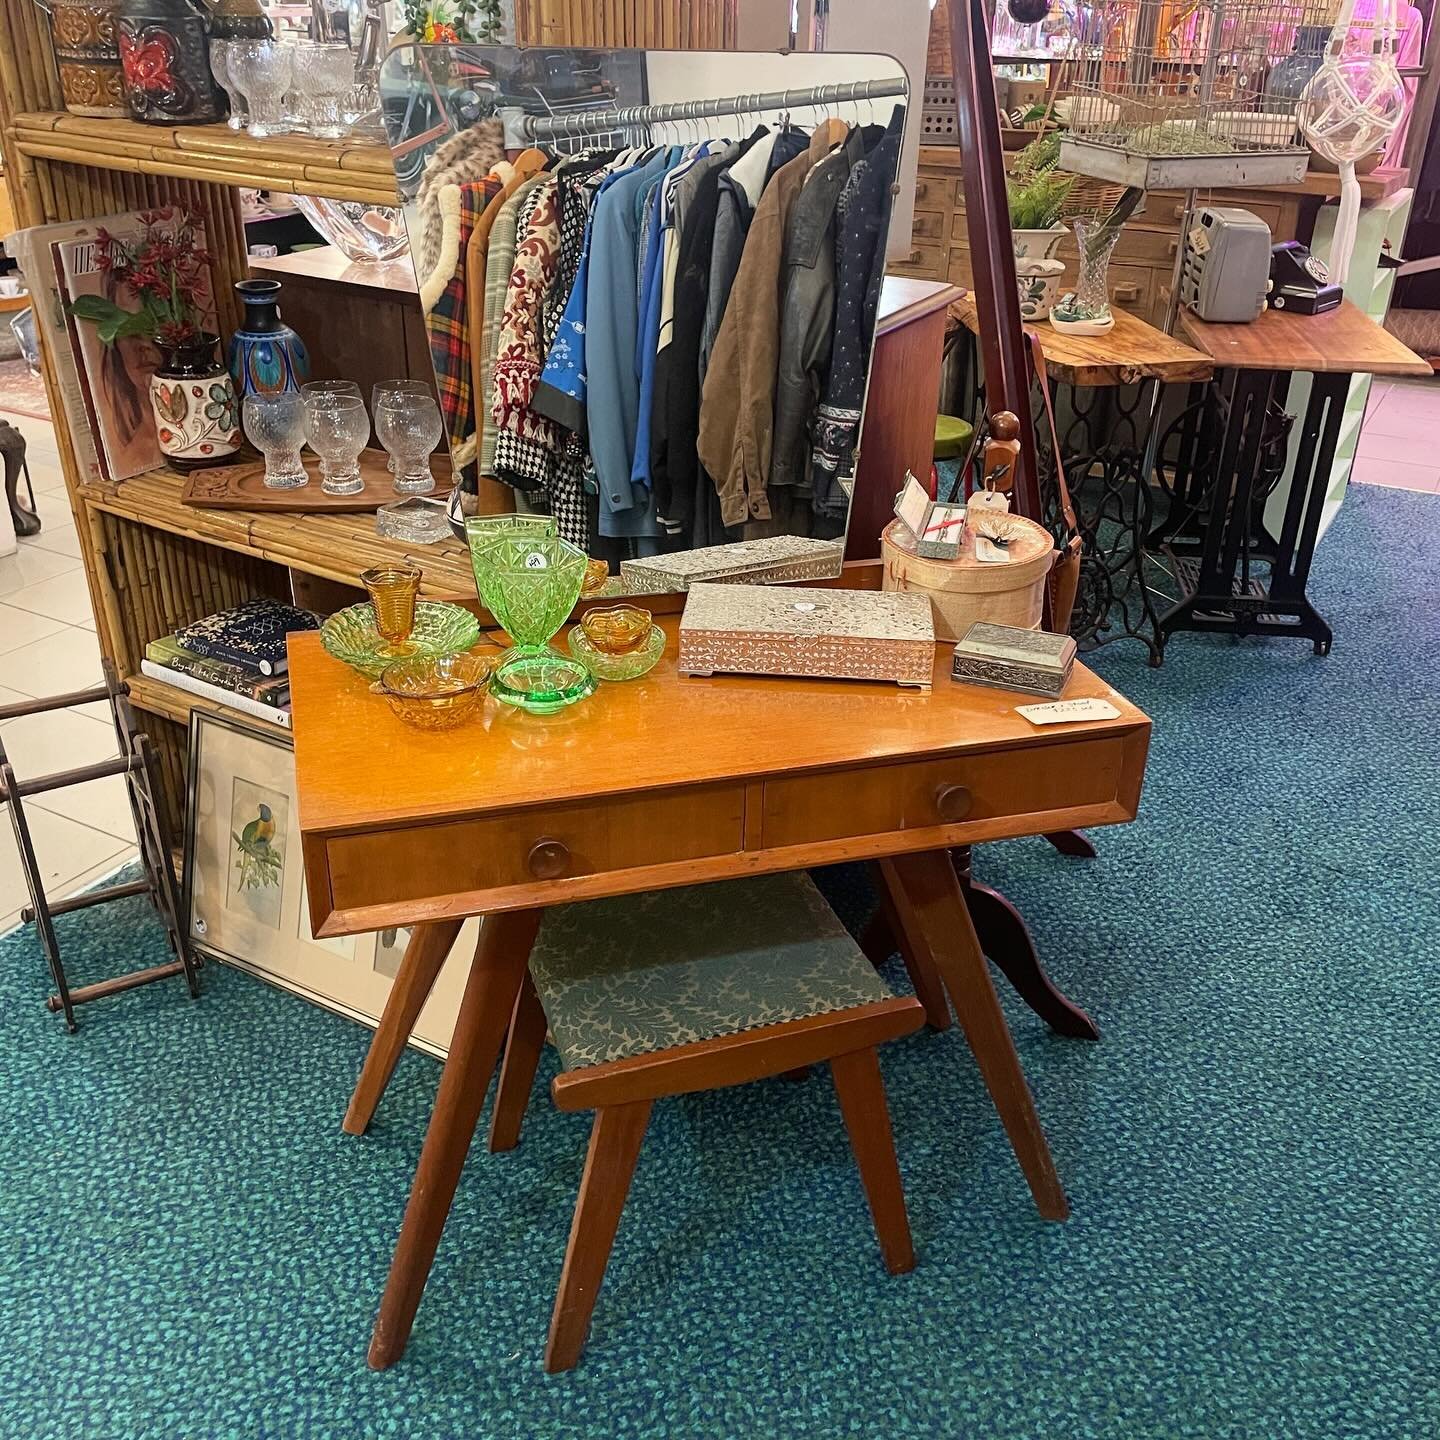 Stop in this weekend!!! Open 10-6 every day carpark to the right of the building with both sides available to park. 

#retrohome #shopsustainably #vintageheaven #sydney #vintageshopsydney